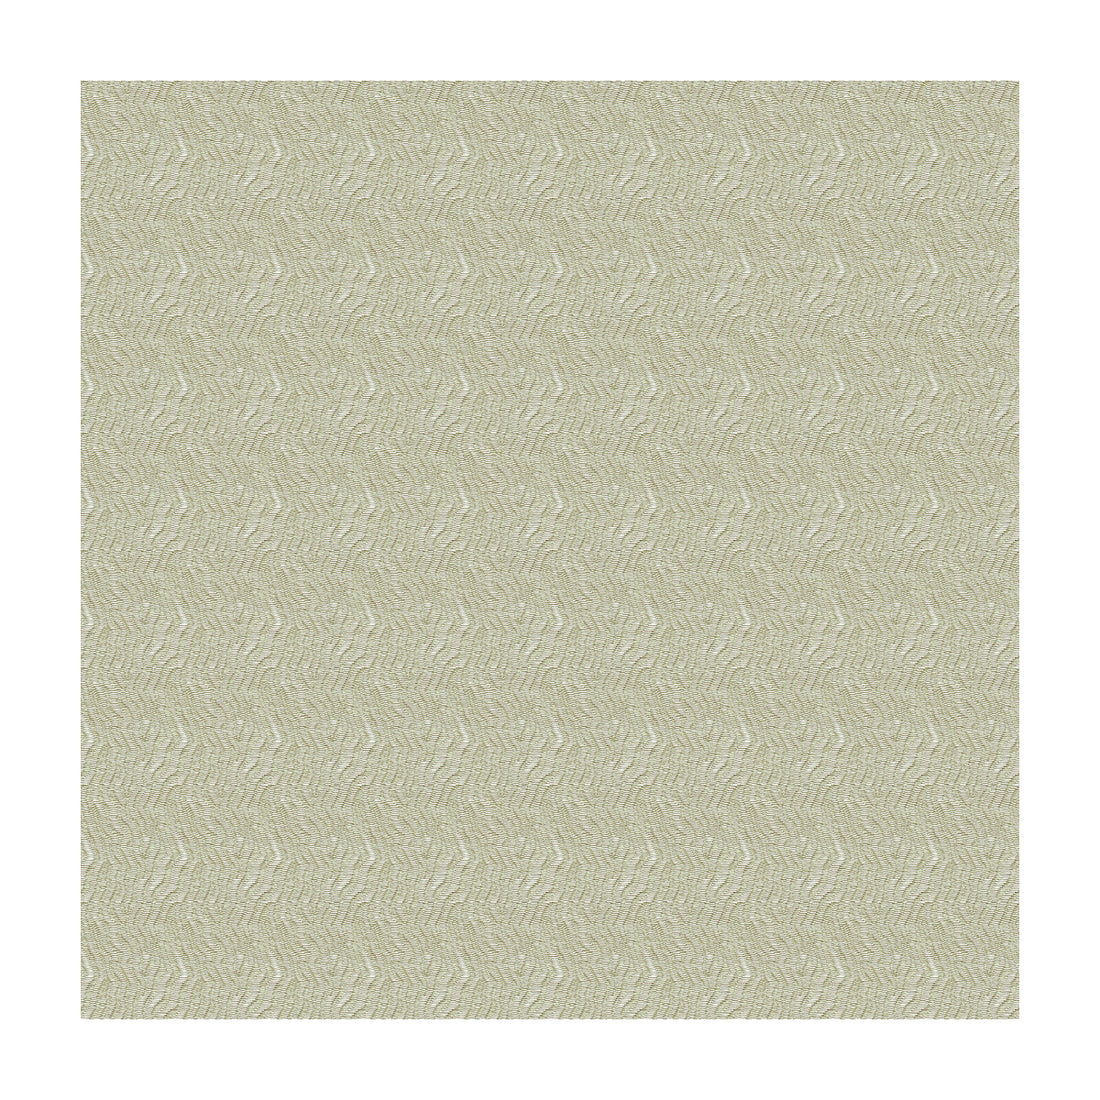 Kf Smt Jentry fabric in diamond color - pattern 27968.1611.0 - by Kravet Smart in the Candice Olson collection